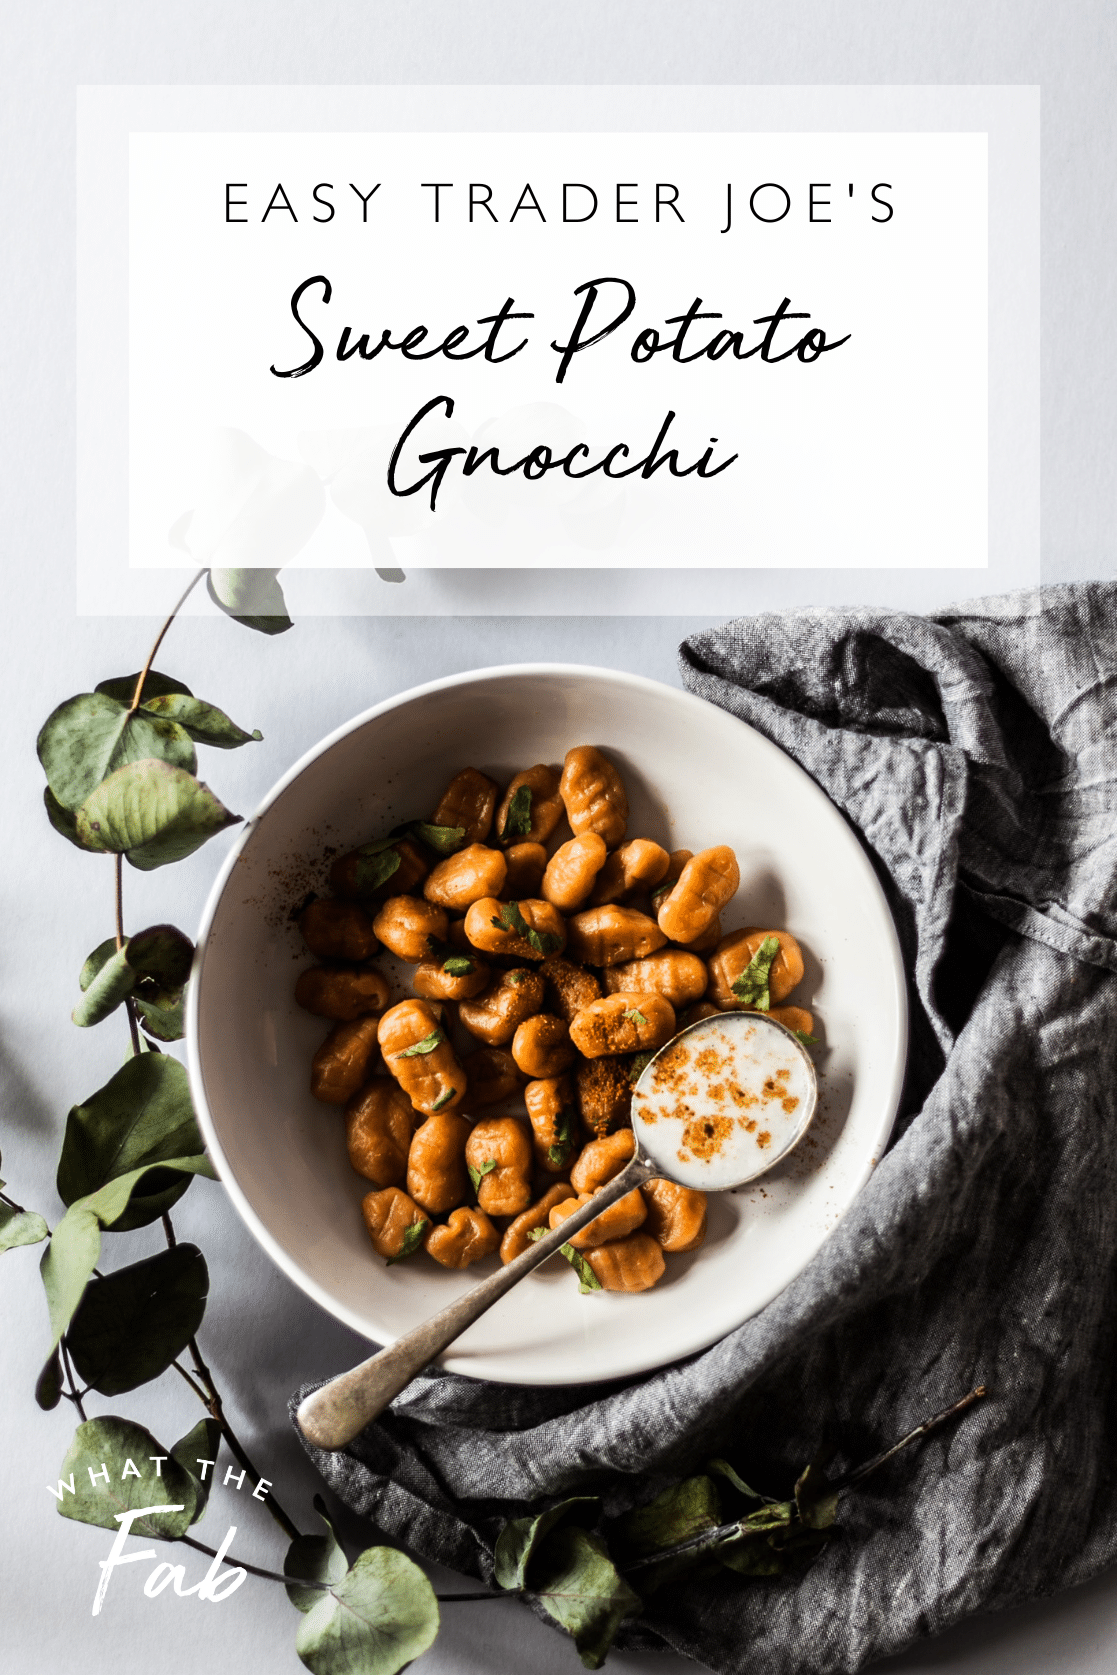 Trader Joe's Sweet Potato Gnocchi by Lifestyle blogger What The Fab